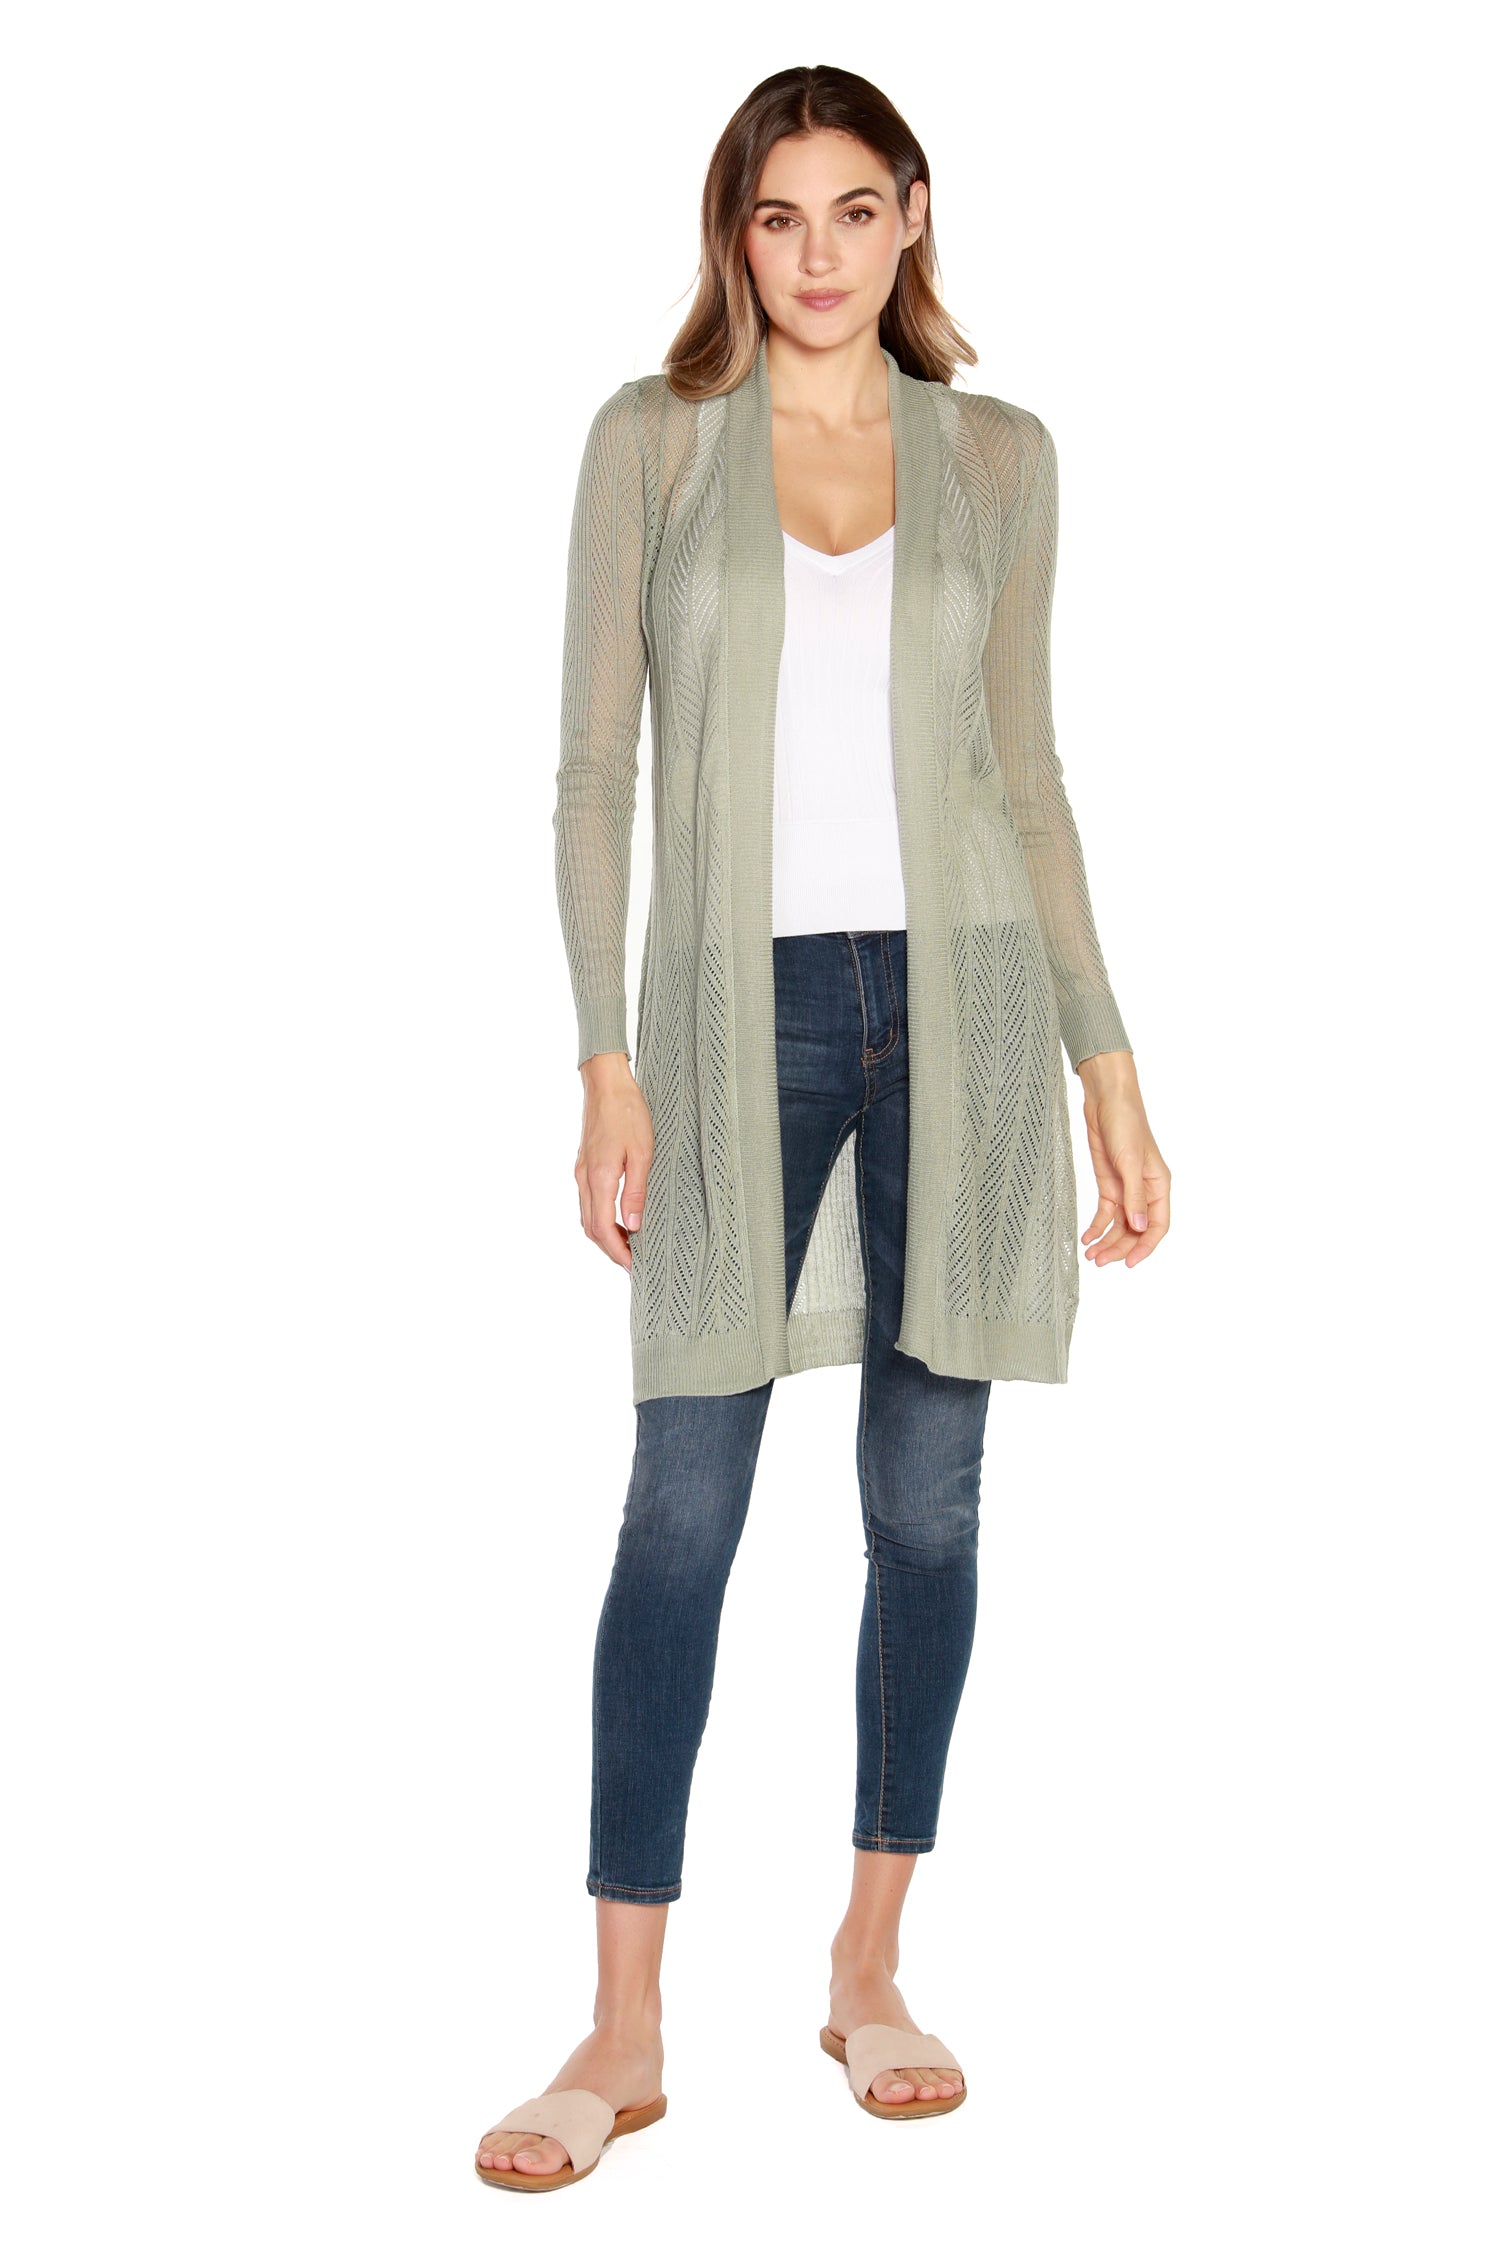 Women’s Semi Sheer Long Cardigan with Chevron Stripes and Pointelle